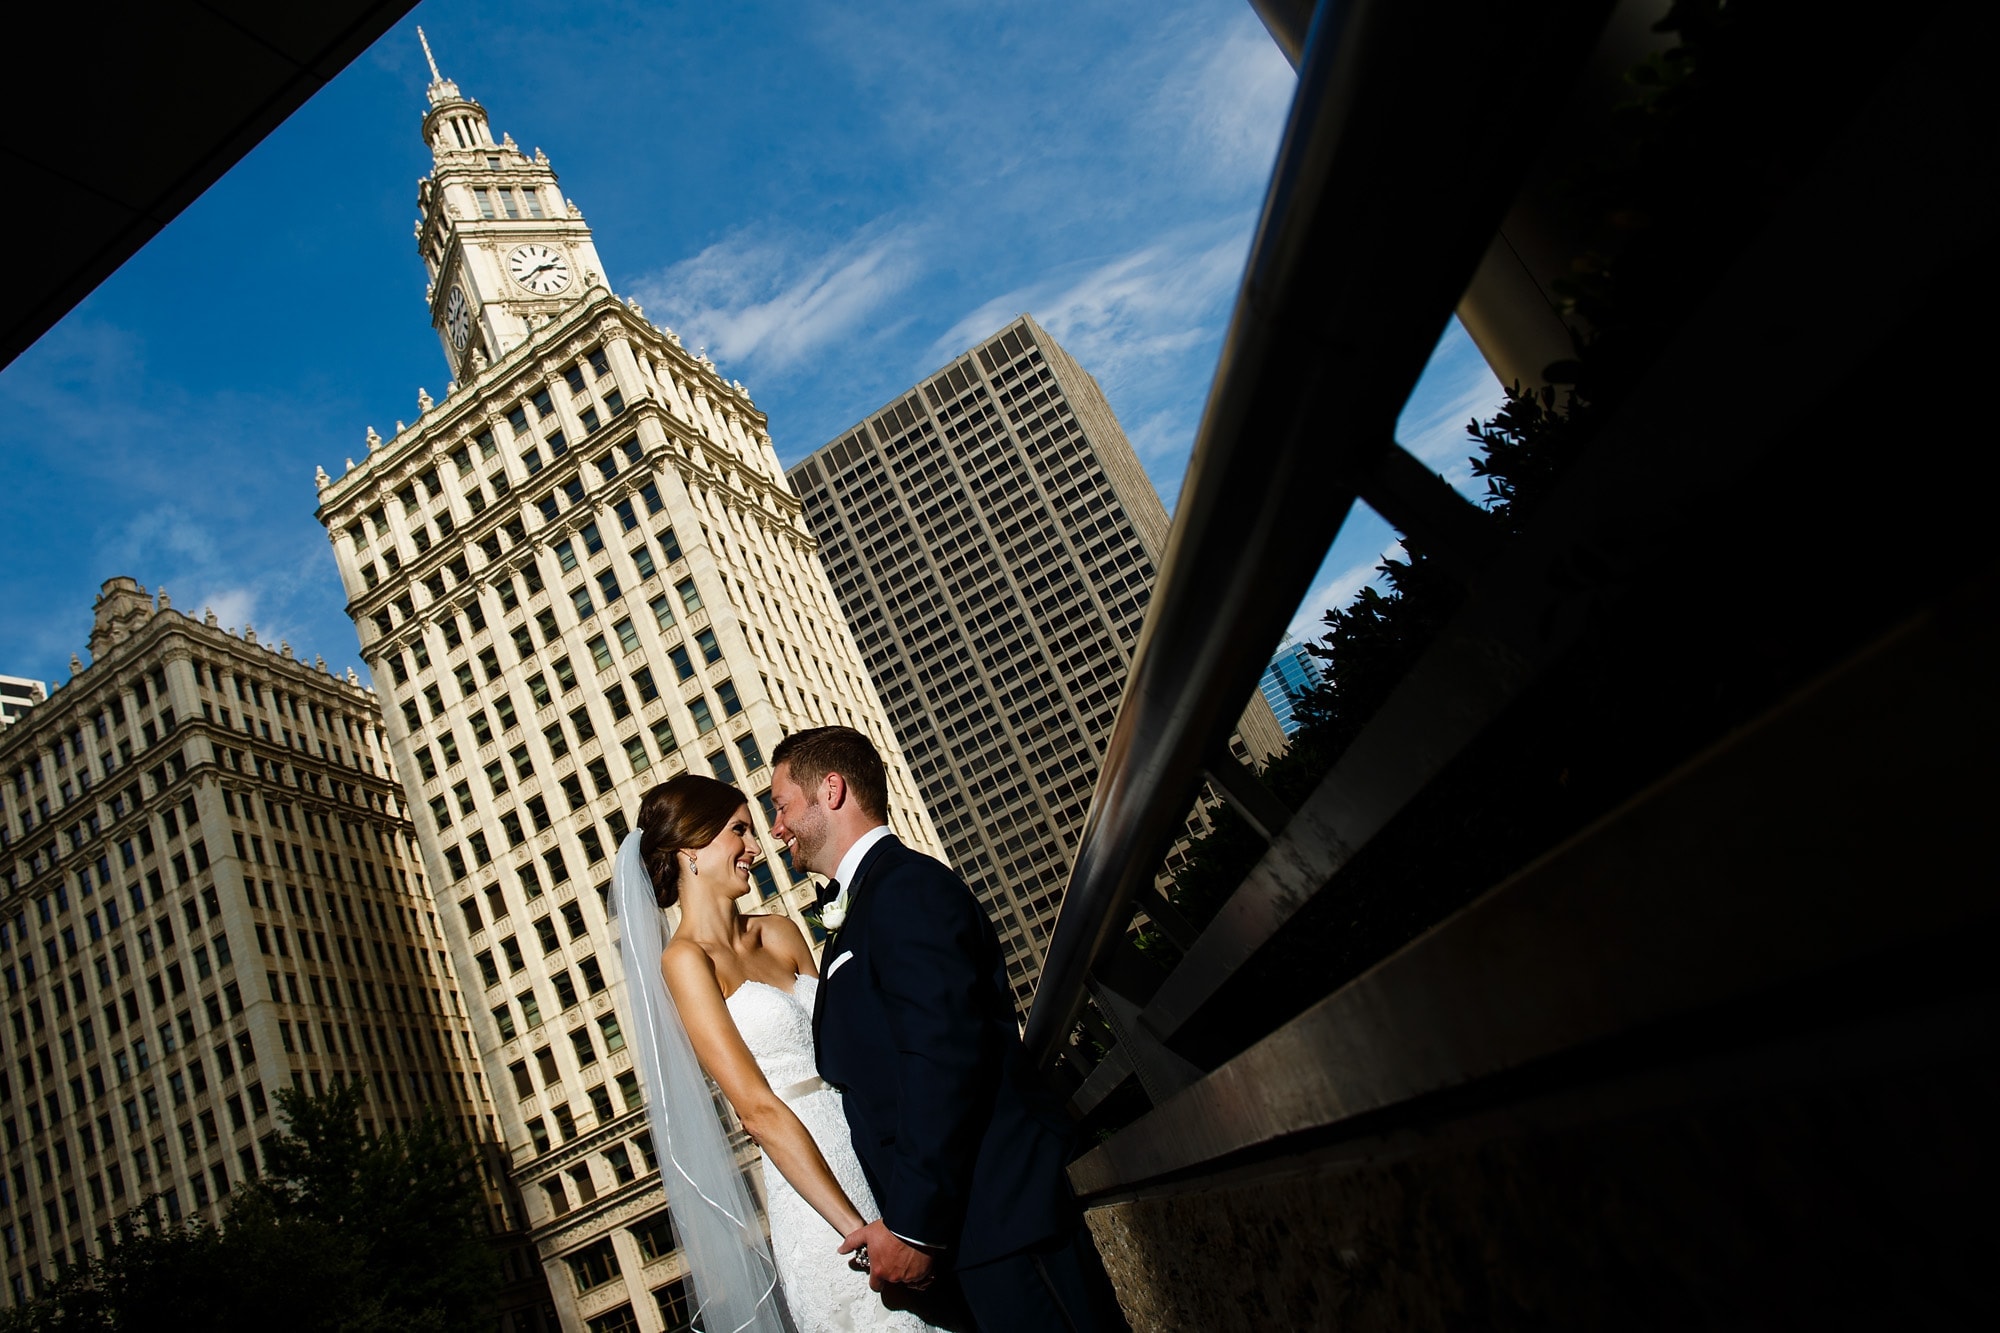 Matt and Kara share a smile together during a portrait session under Trump Tower and near the Wrigley Building in Chicago in August.